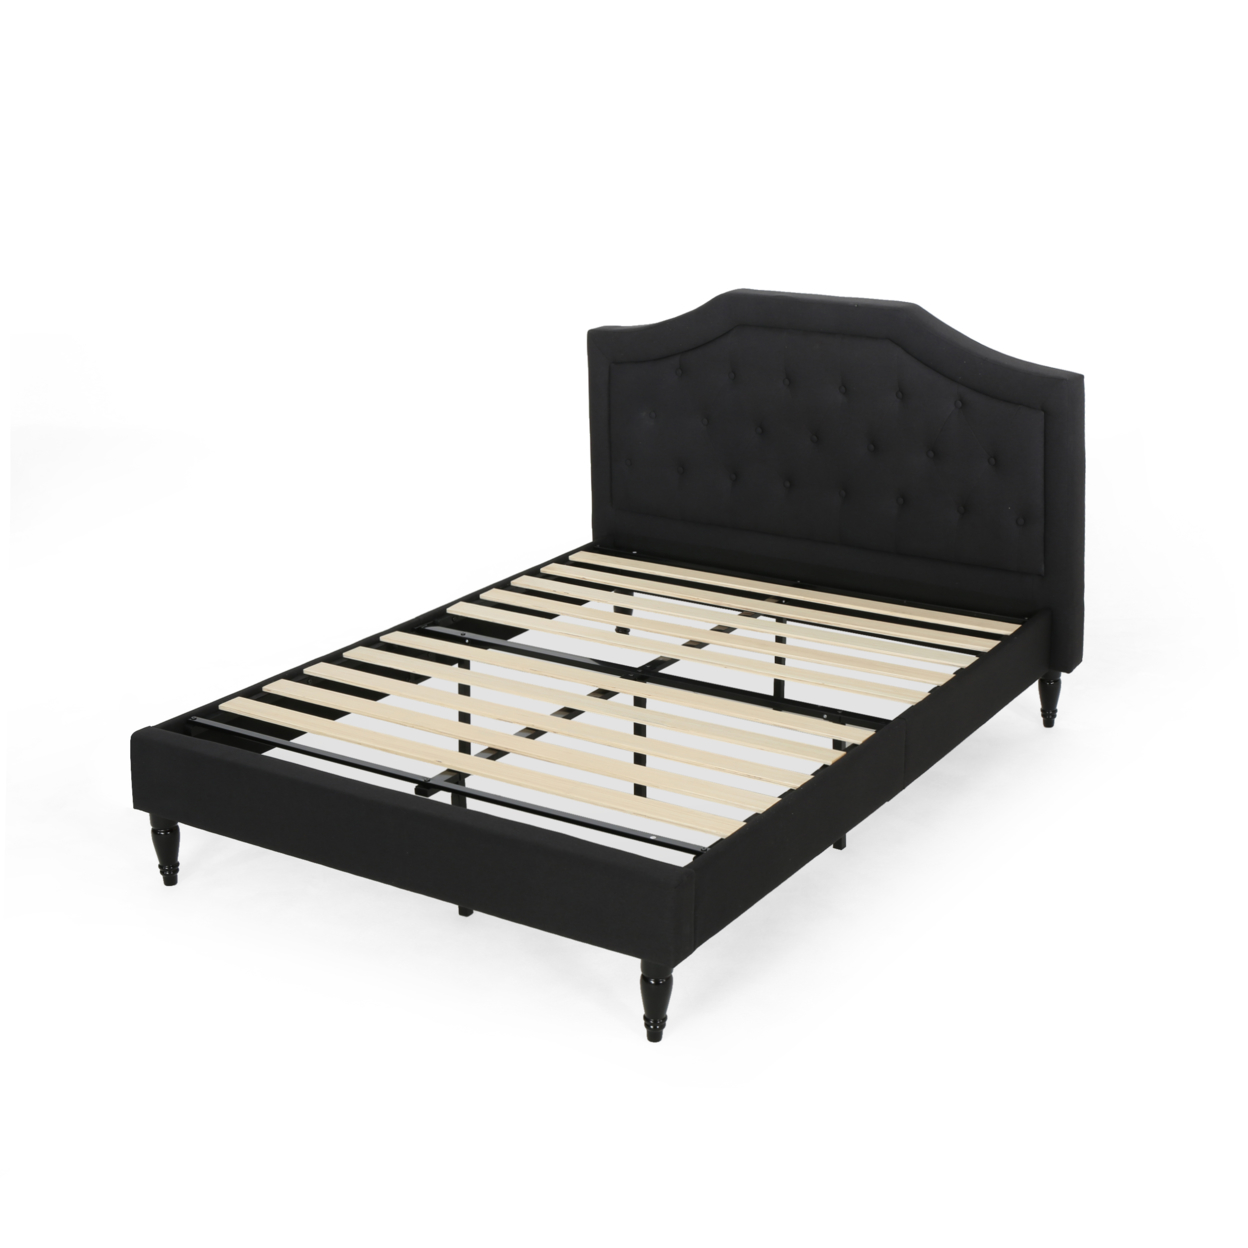 Veromca Theresa Contemporary Fabric Upholstered Queen Sized Bed Set - Black + Dark Brown